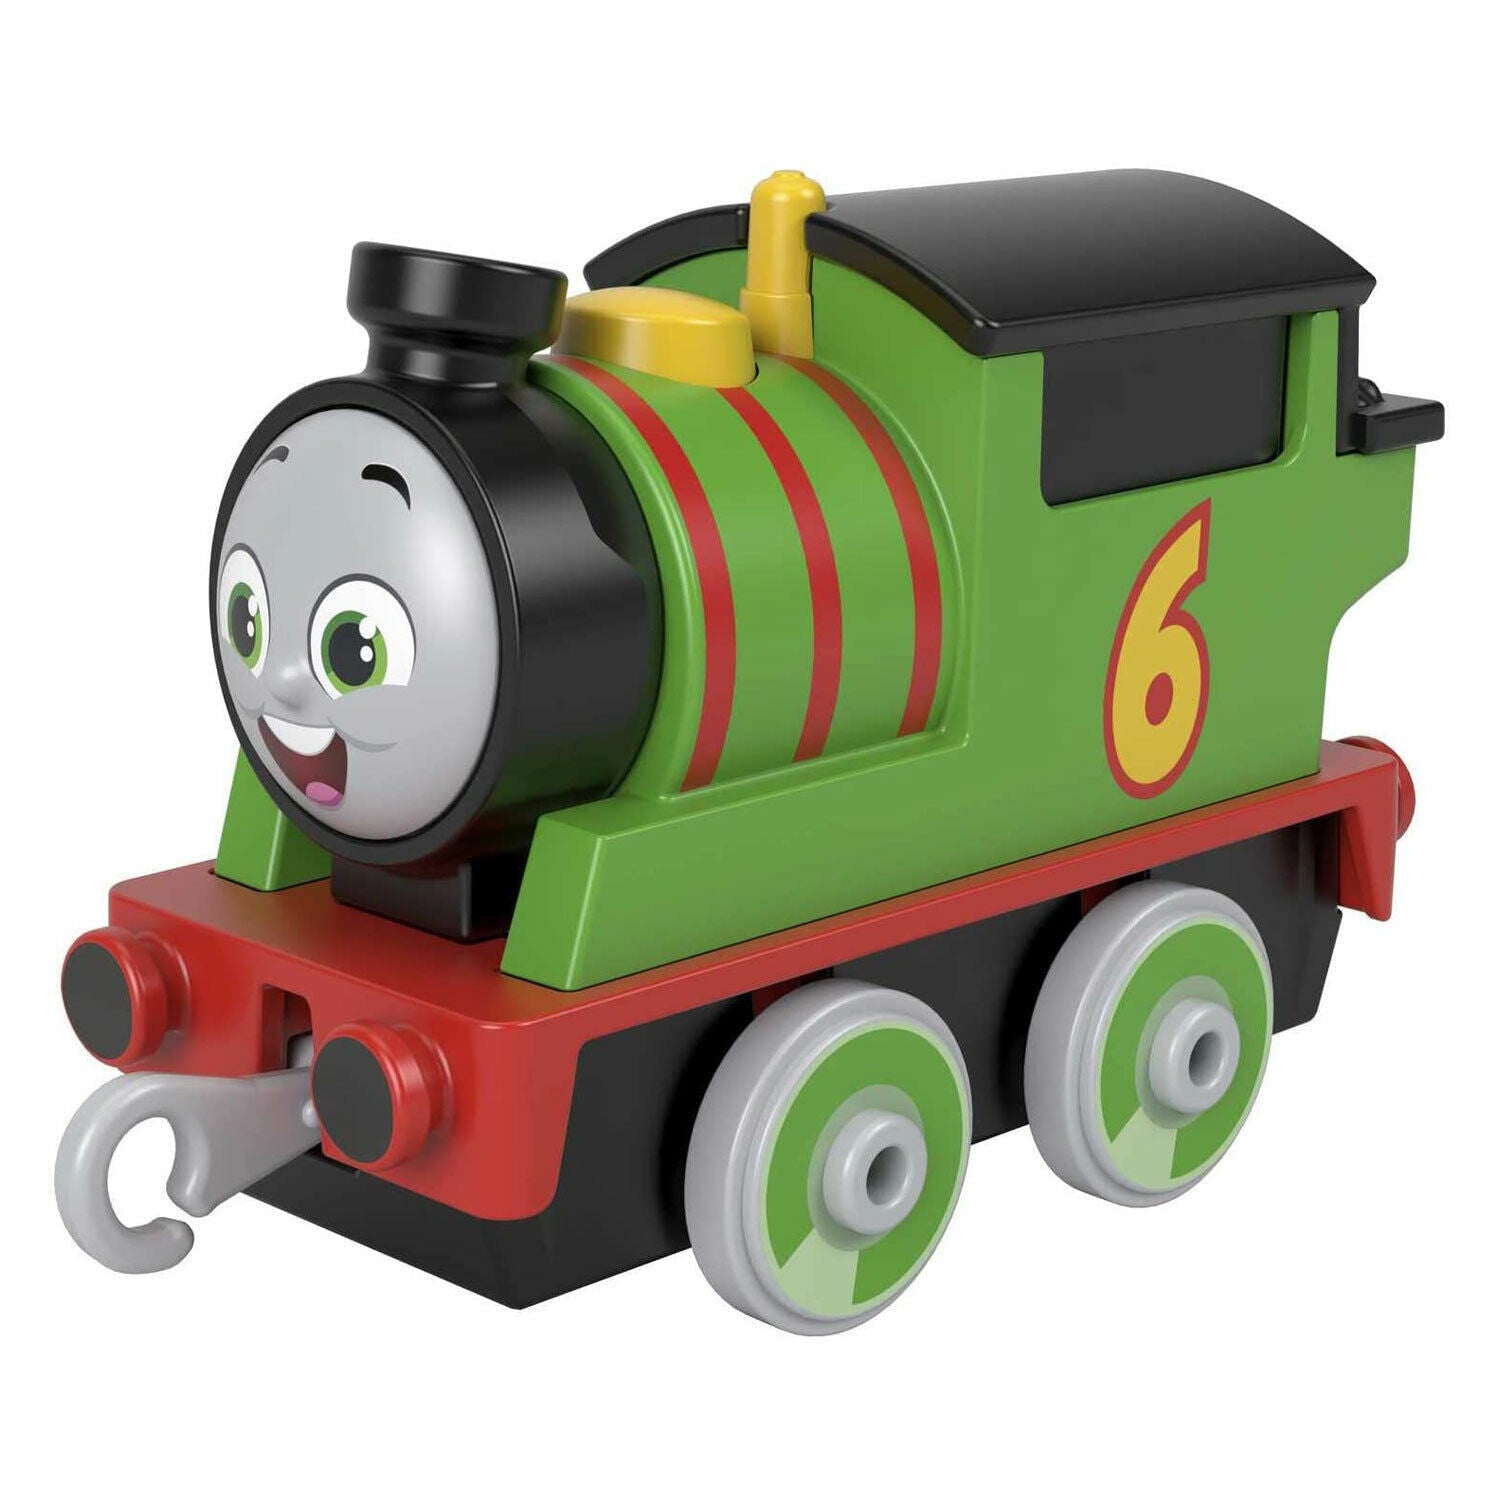 New Fisher-Price Thomas & Friends Percy Metal Engine Toy